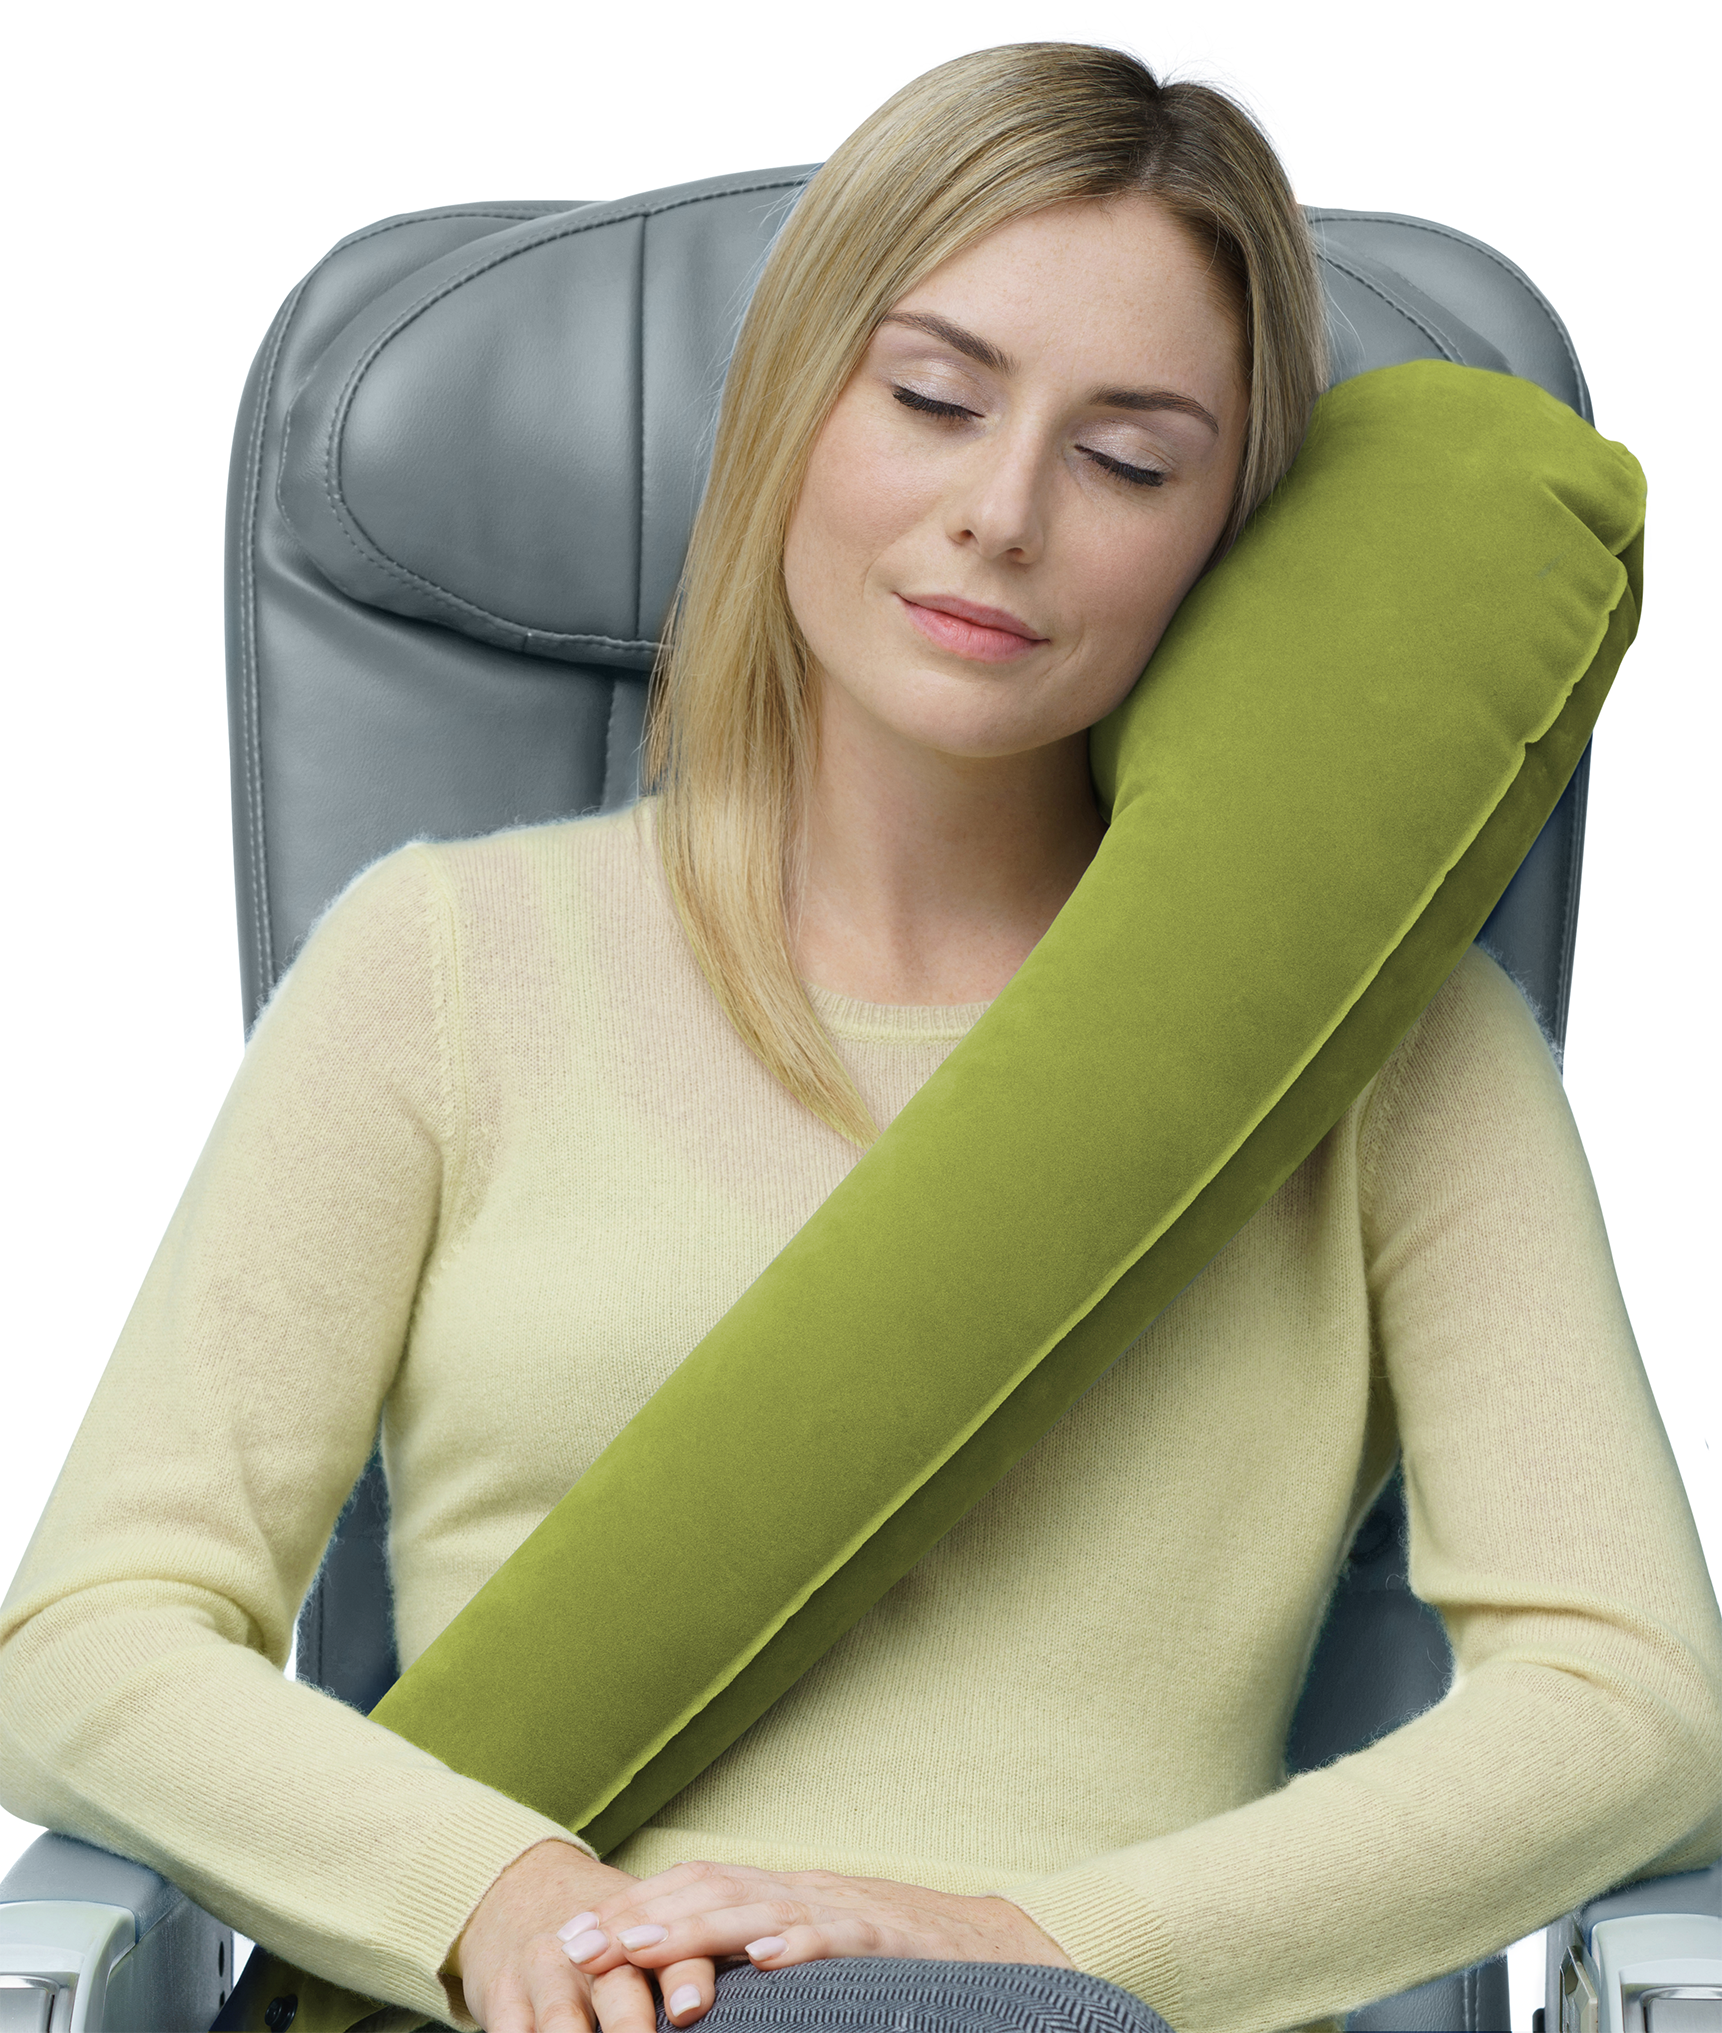 Travel Comfort Redefined: Inflatable Airplane Sleeping Pillow and Seat  Cushion